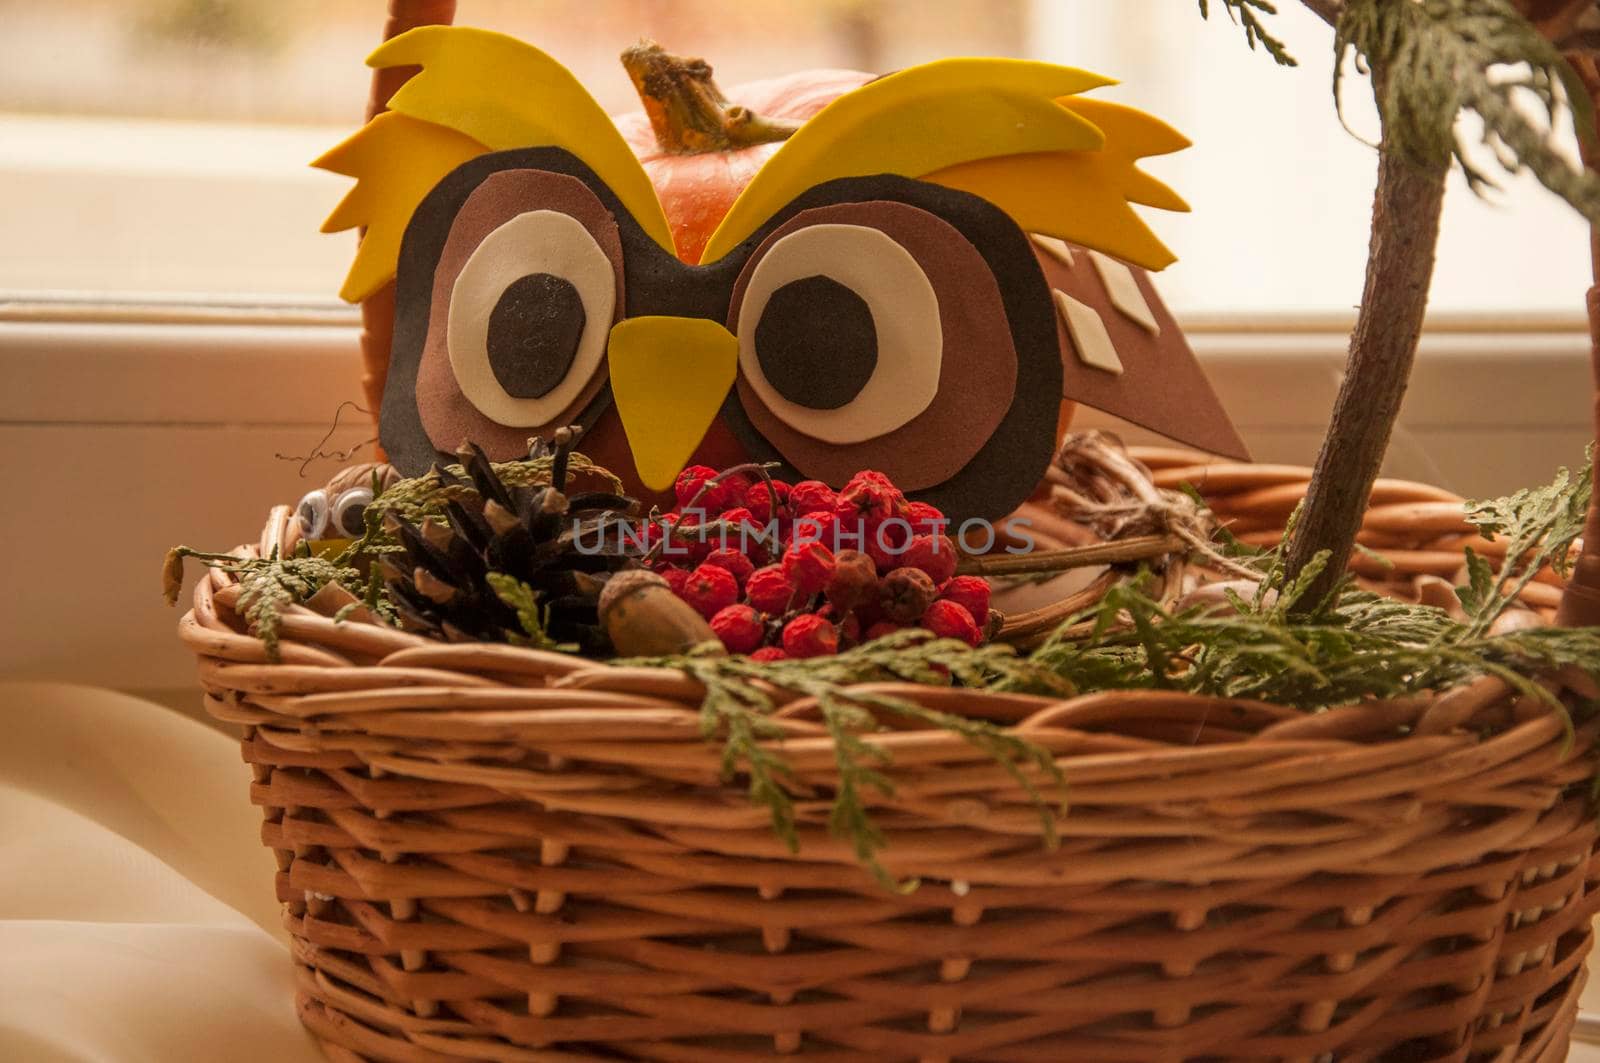 owl made of paper in a basket with rowan berries. Autumn